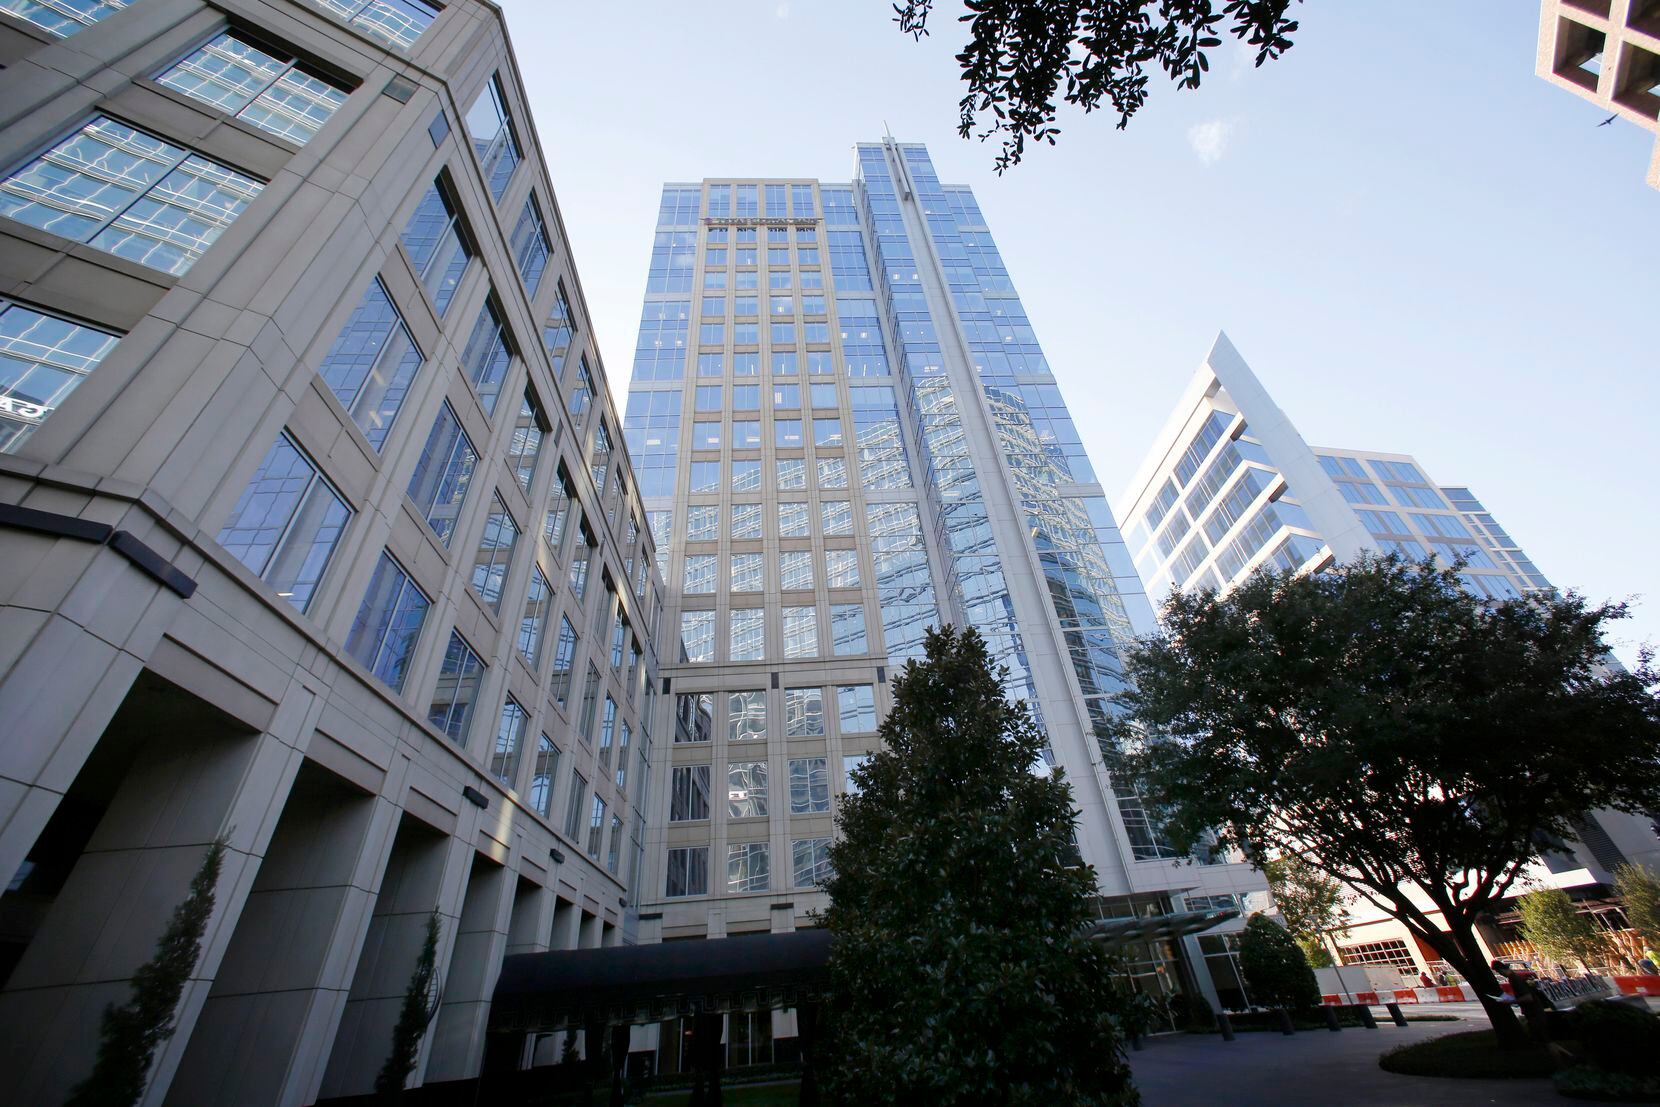 A foreign investment company recently purchased the property located at 2000 McKinney in...